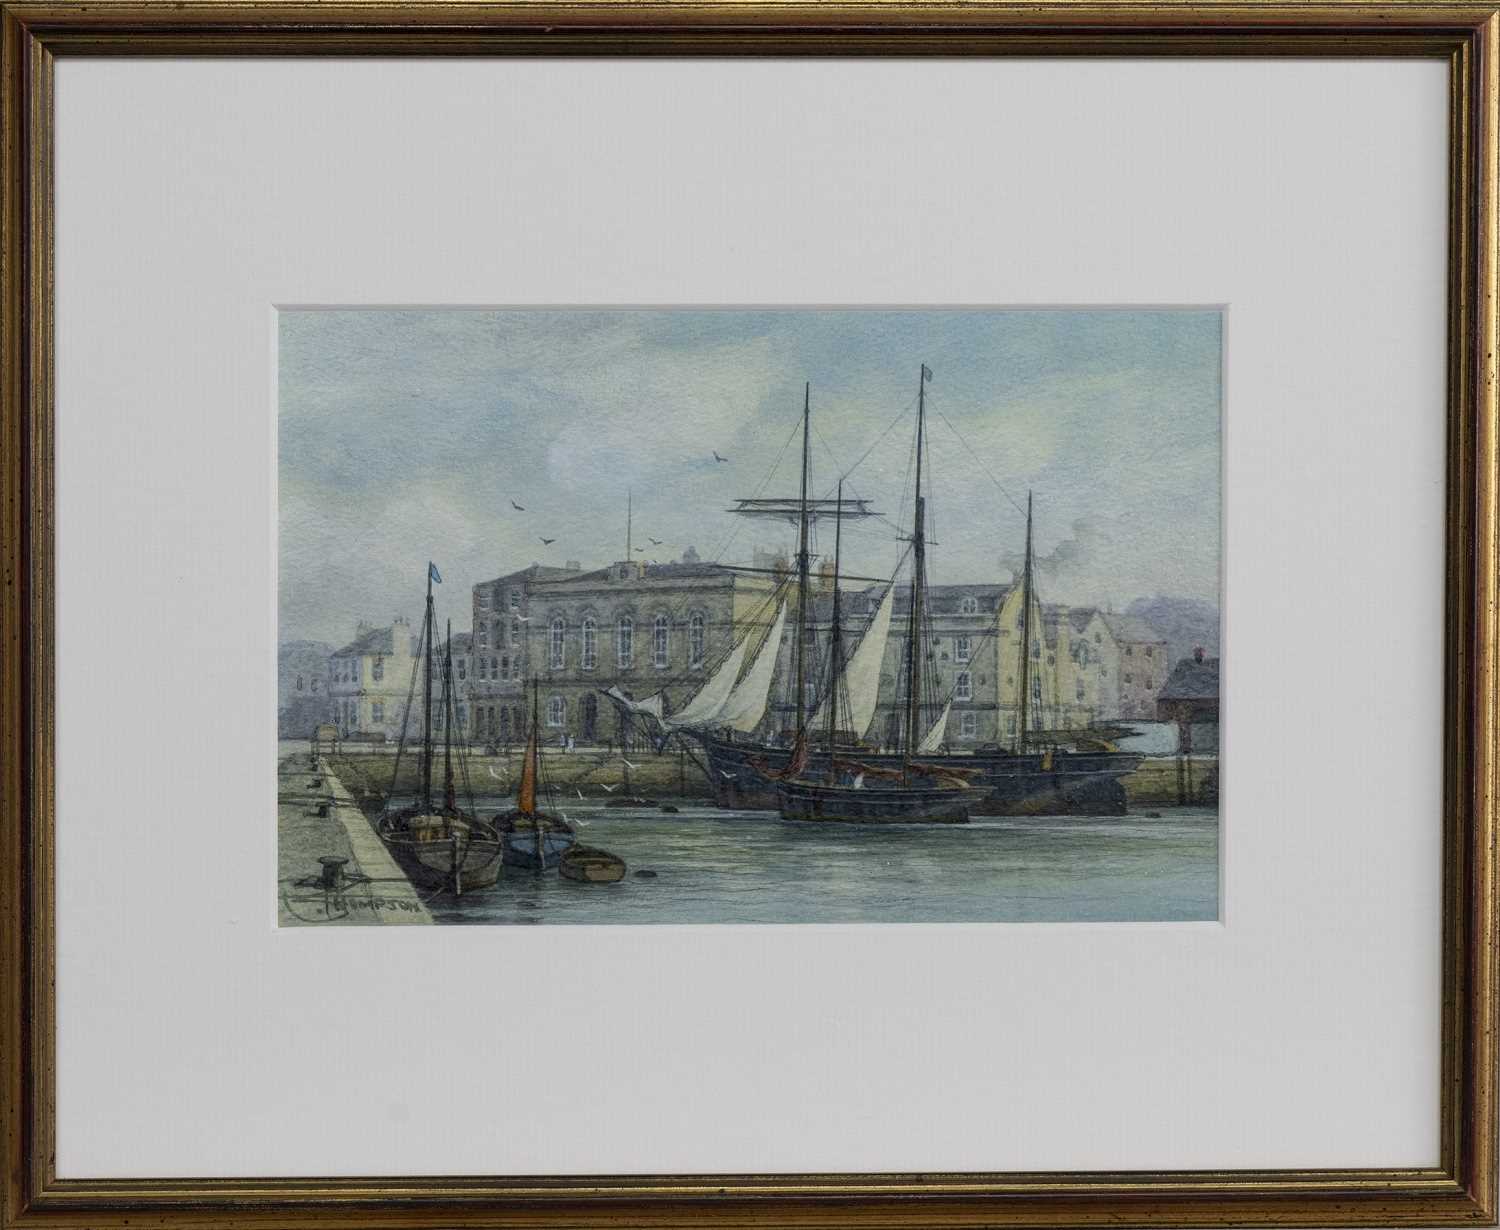 CUSTOMS HOUSE, BARBICAN (PLYMOUTH), A WATERCOLOUR BY TIM THOMPSON